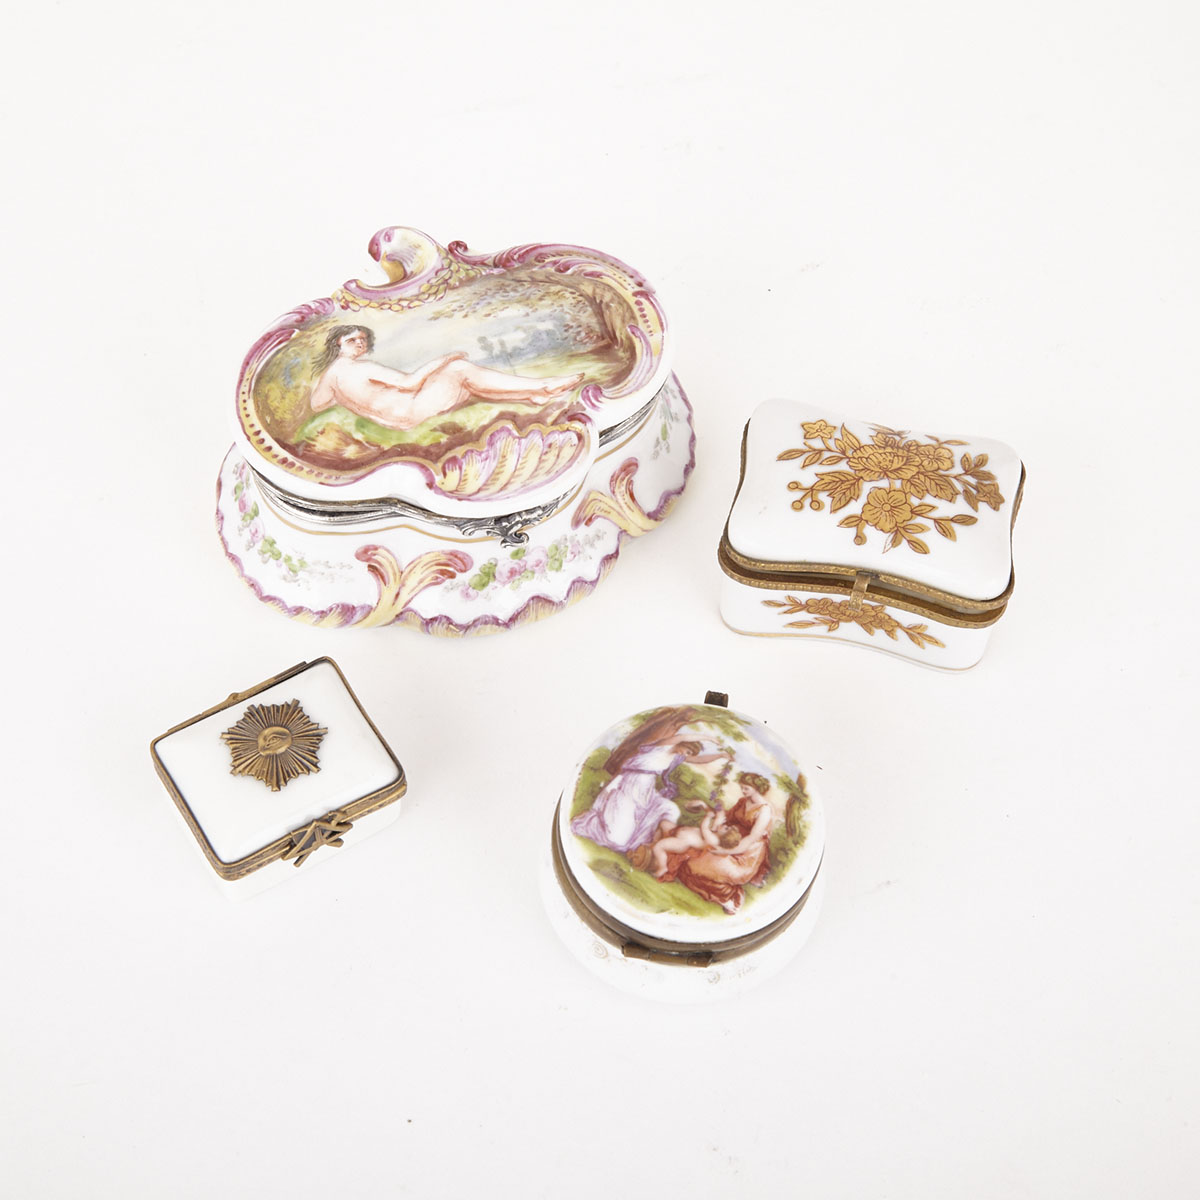 Naples Porcelain Dresser Box together with Three Limoges Porcelain Snuff Boxes, 20th century